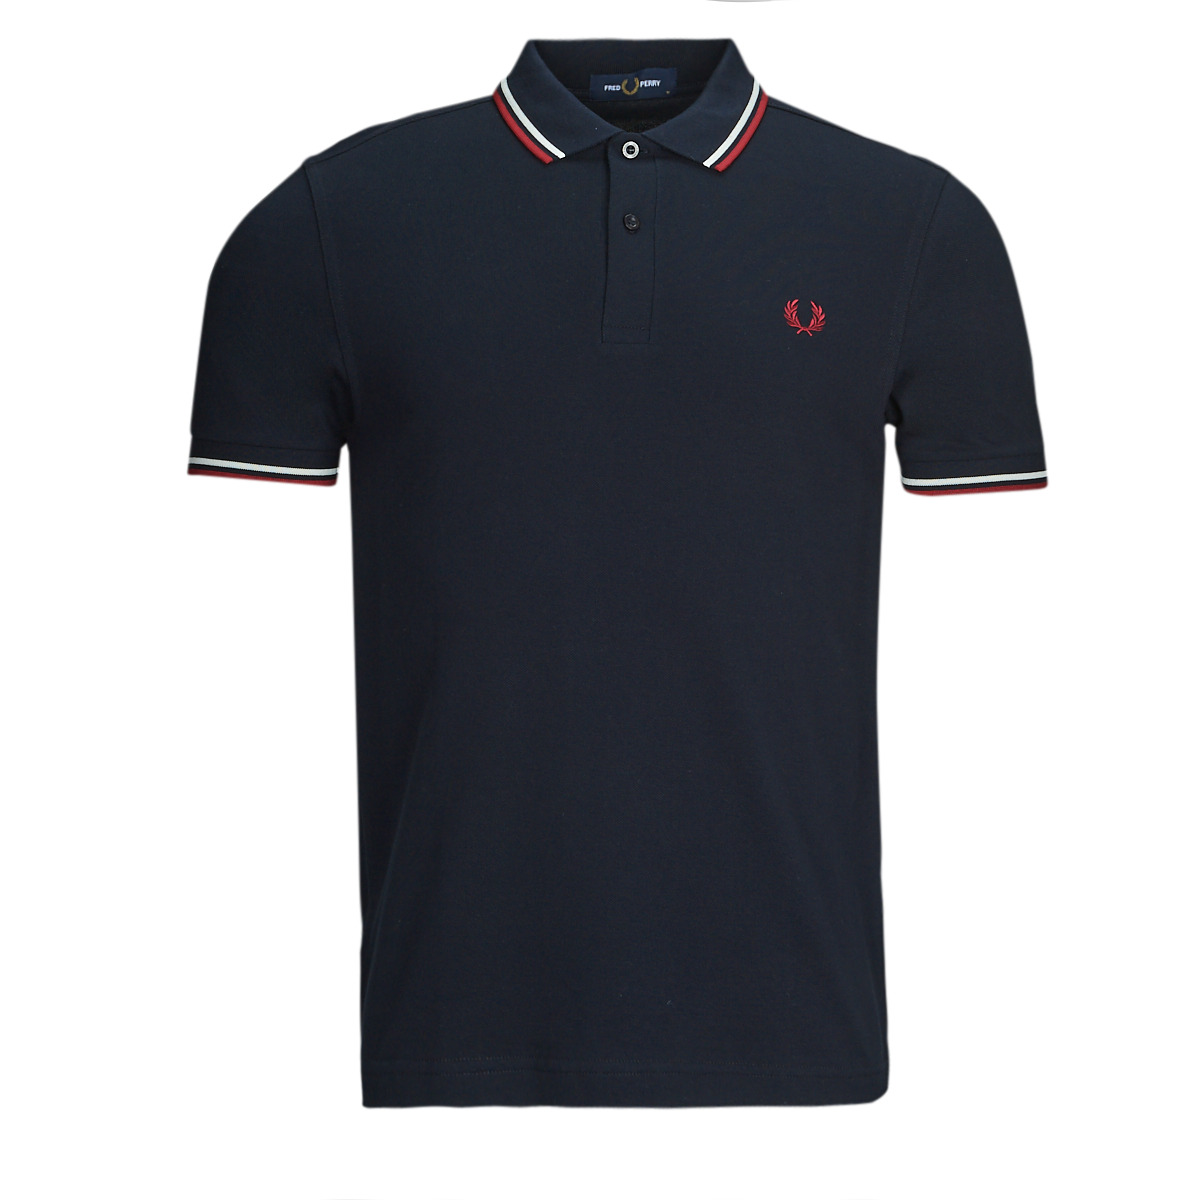 Fred Perry Marine / Blanc / Rouge TWIN TIPPED FRED PERRY SHIRT far6jyB2